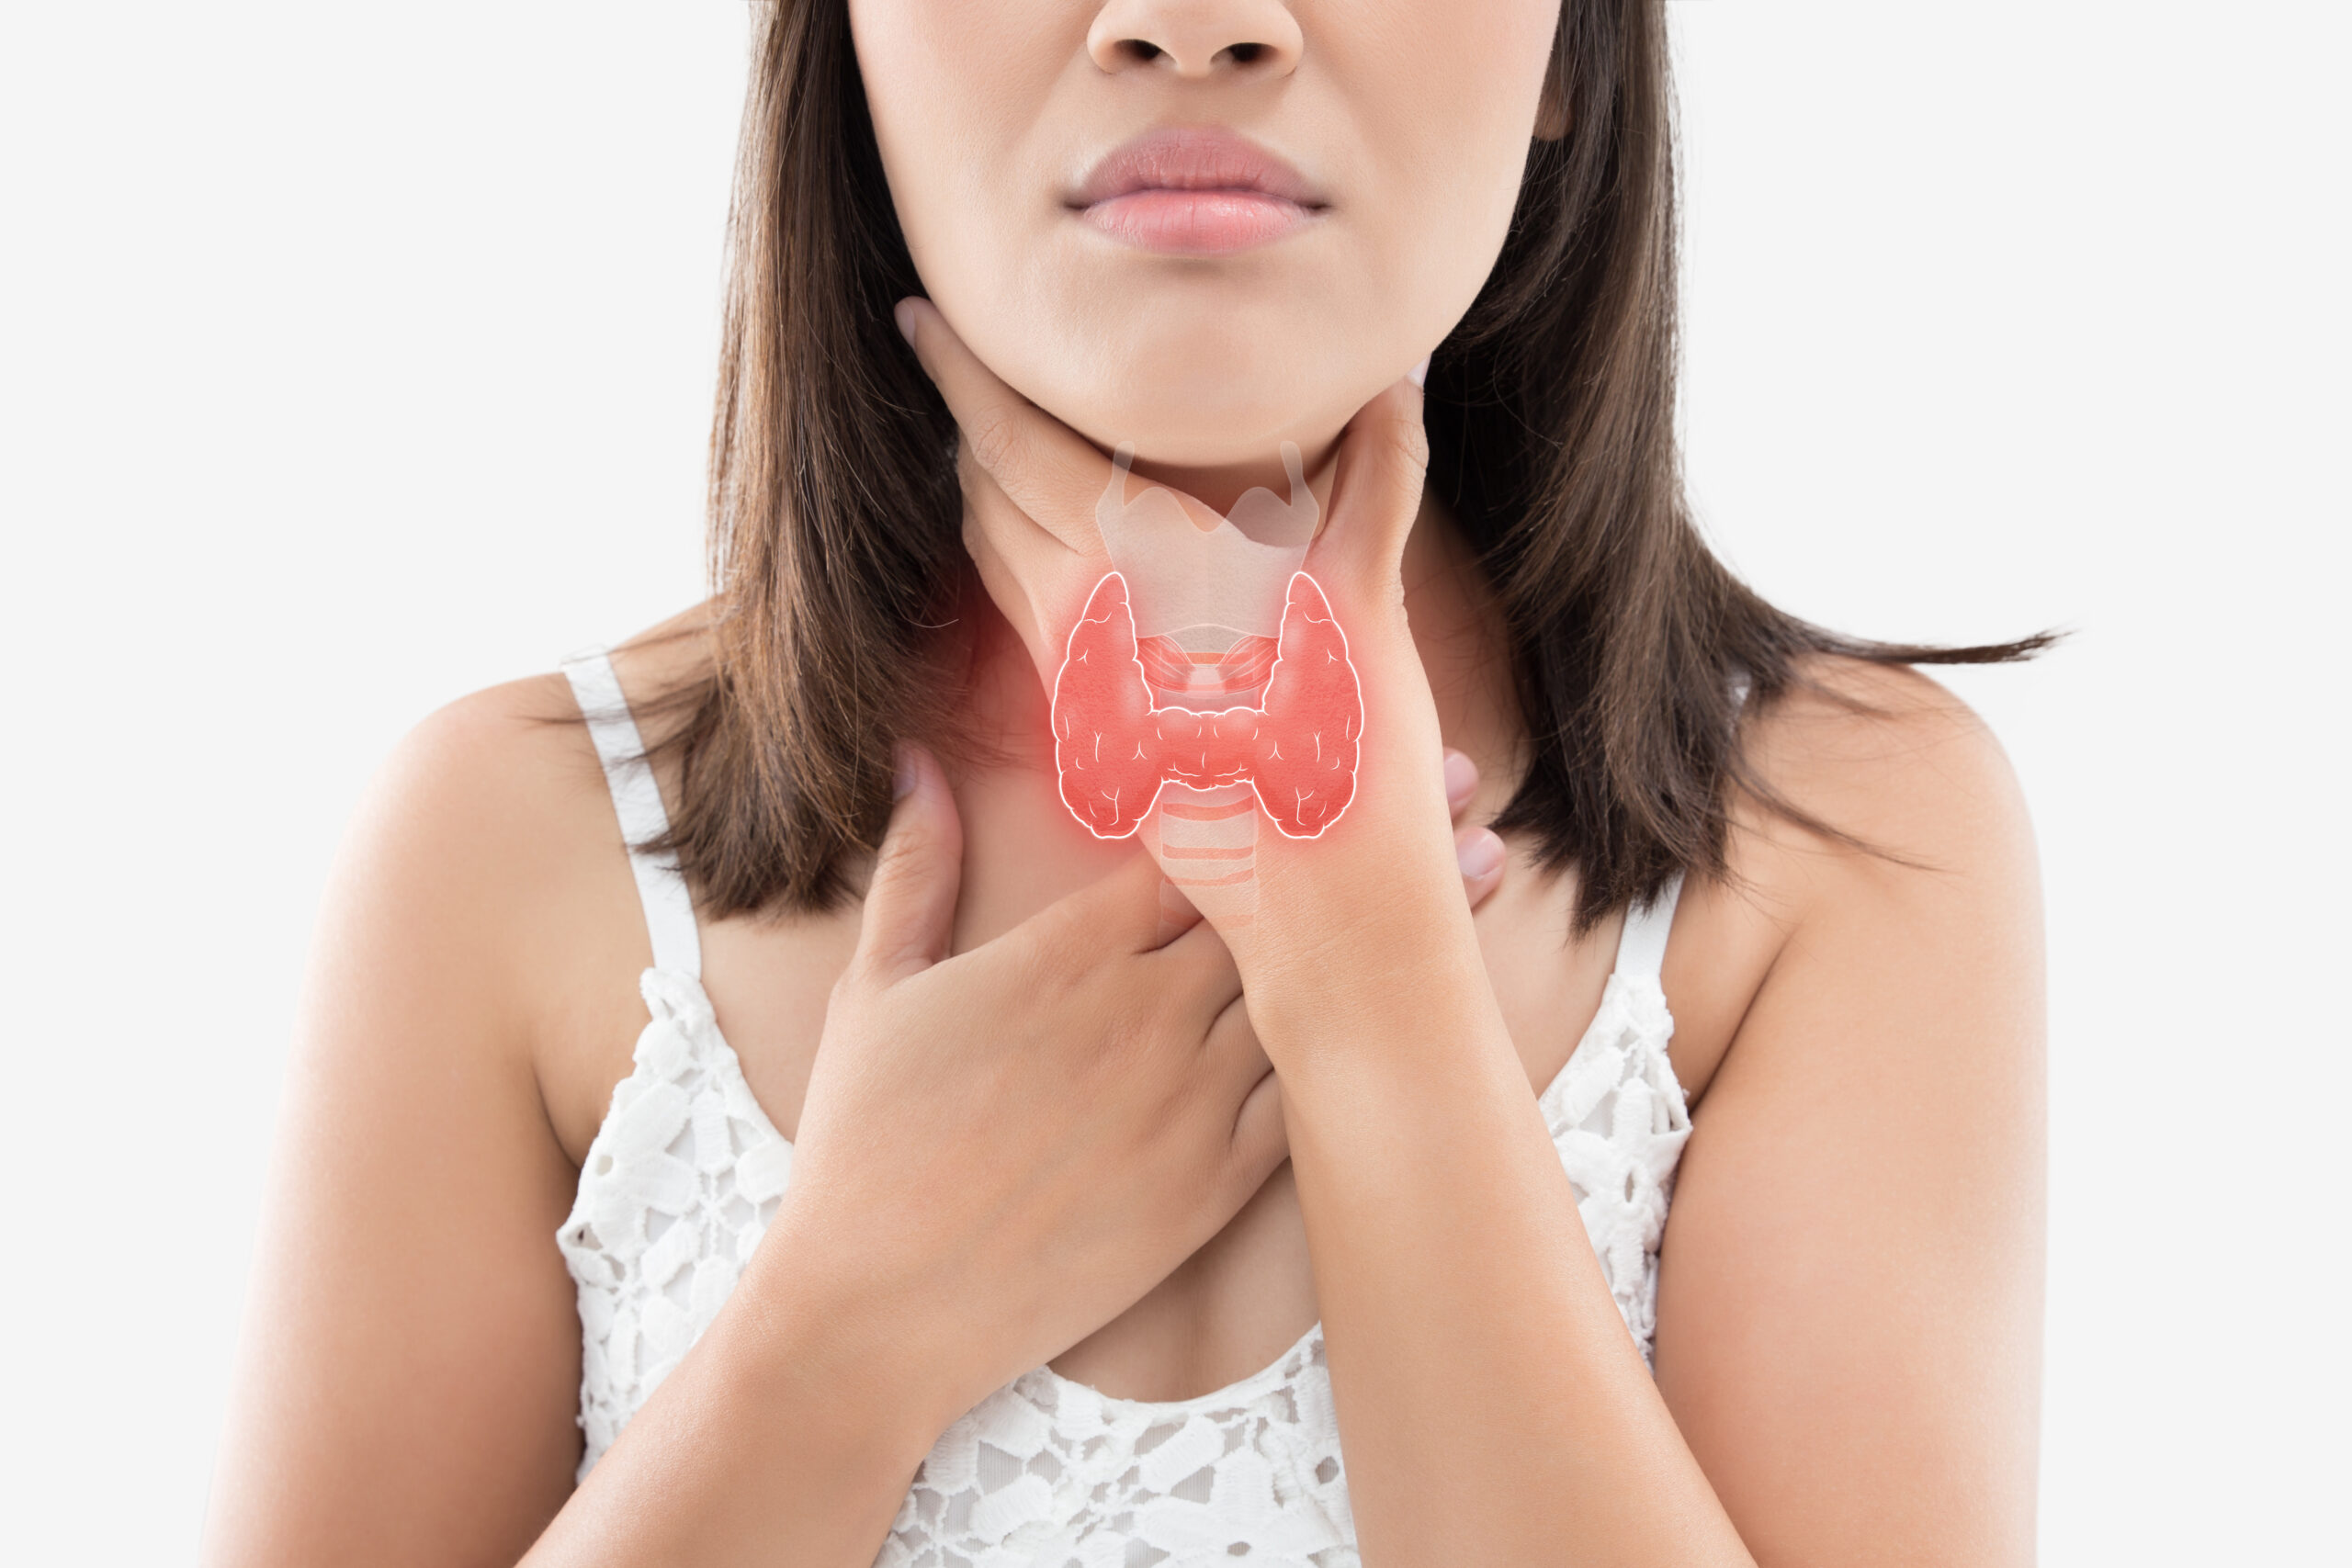 Signs You May Have a Thyroid Problem